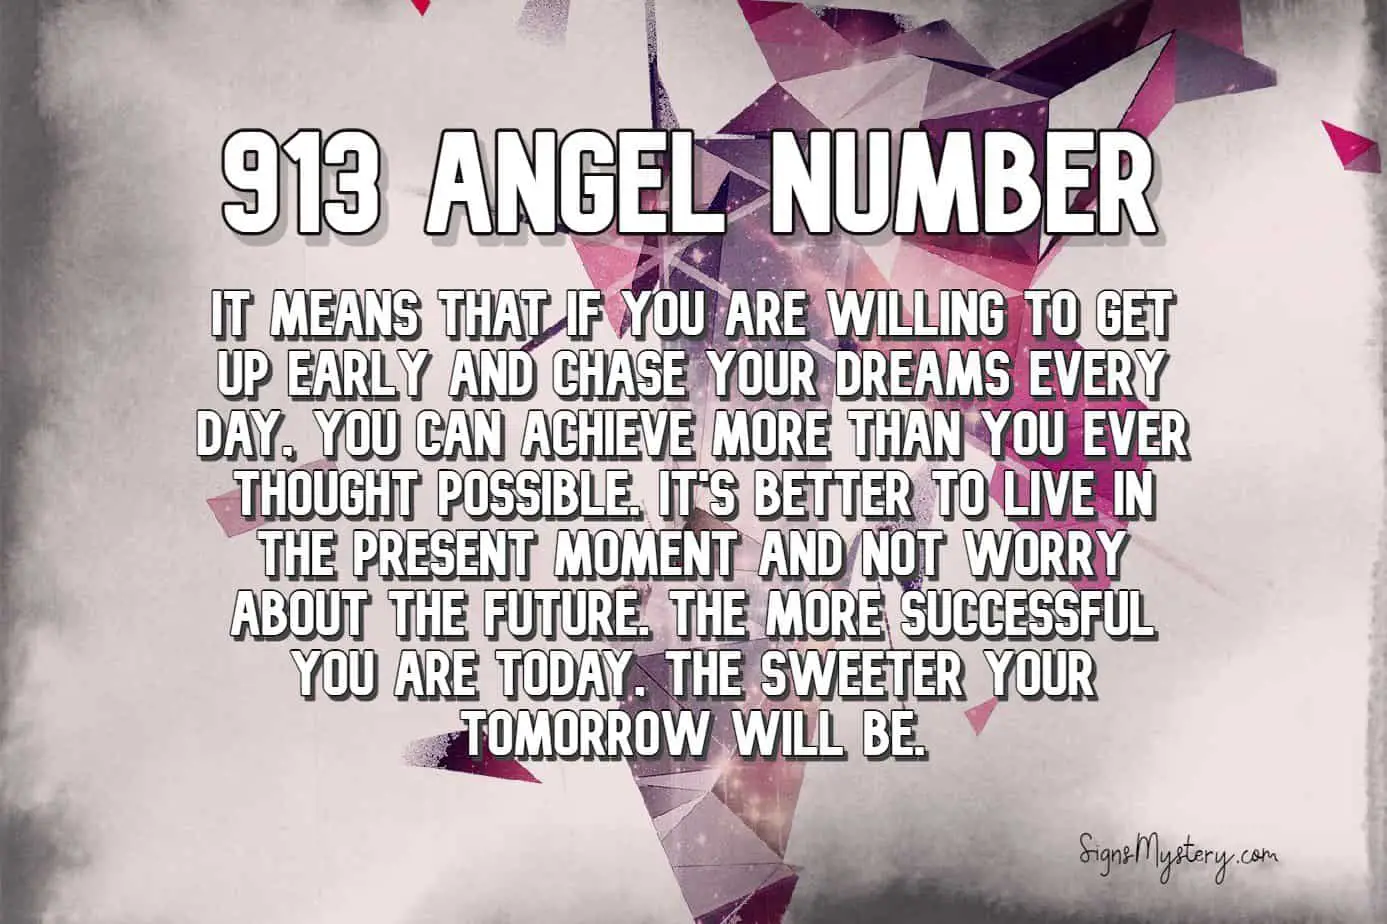 913 Angel Number Meaning and Symbolism  SignsMystery